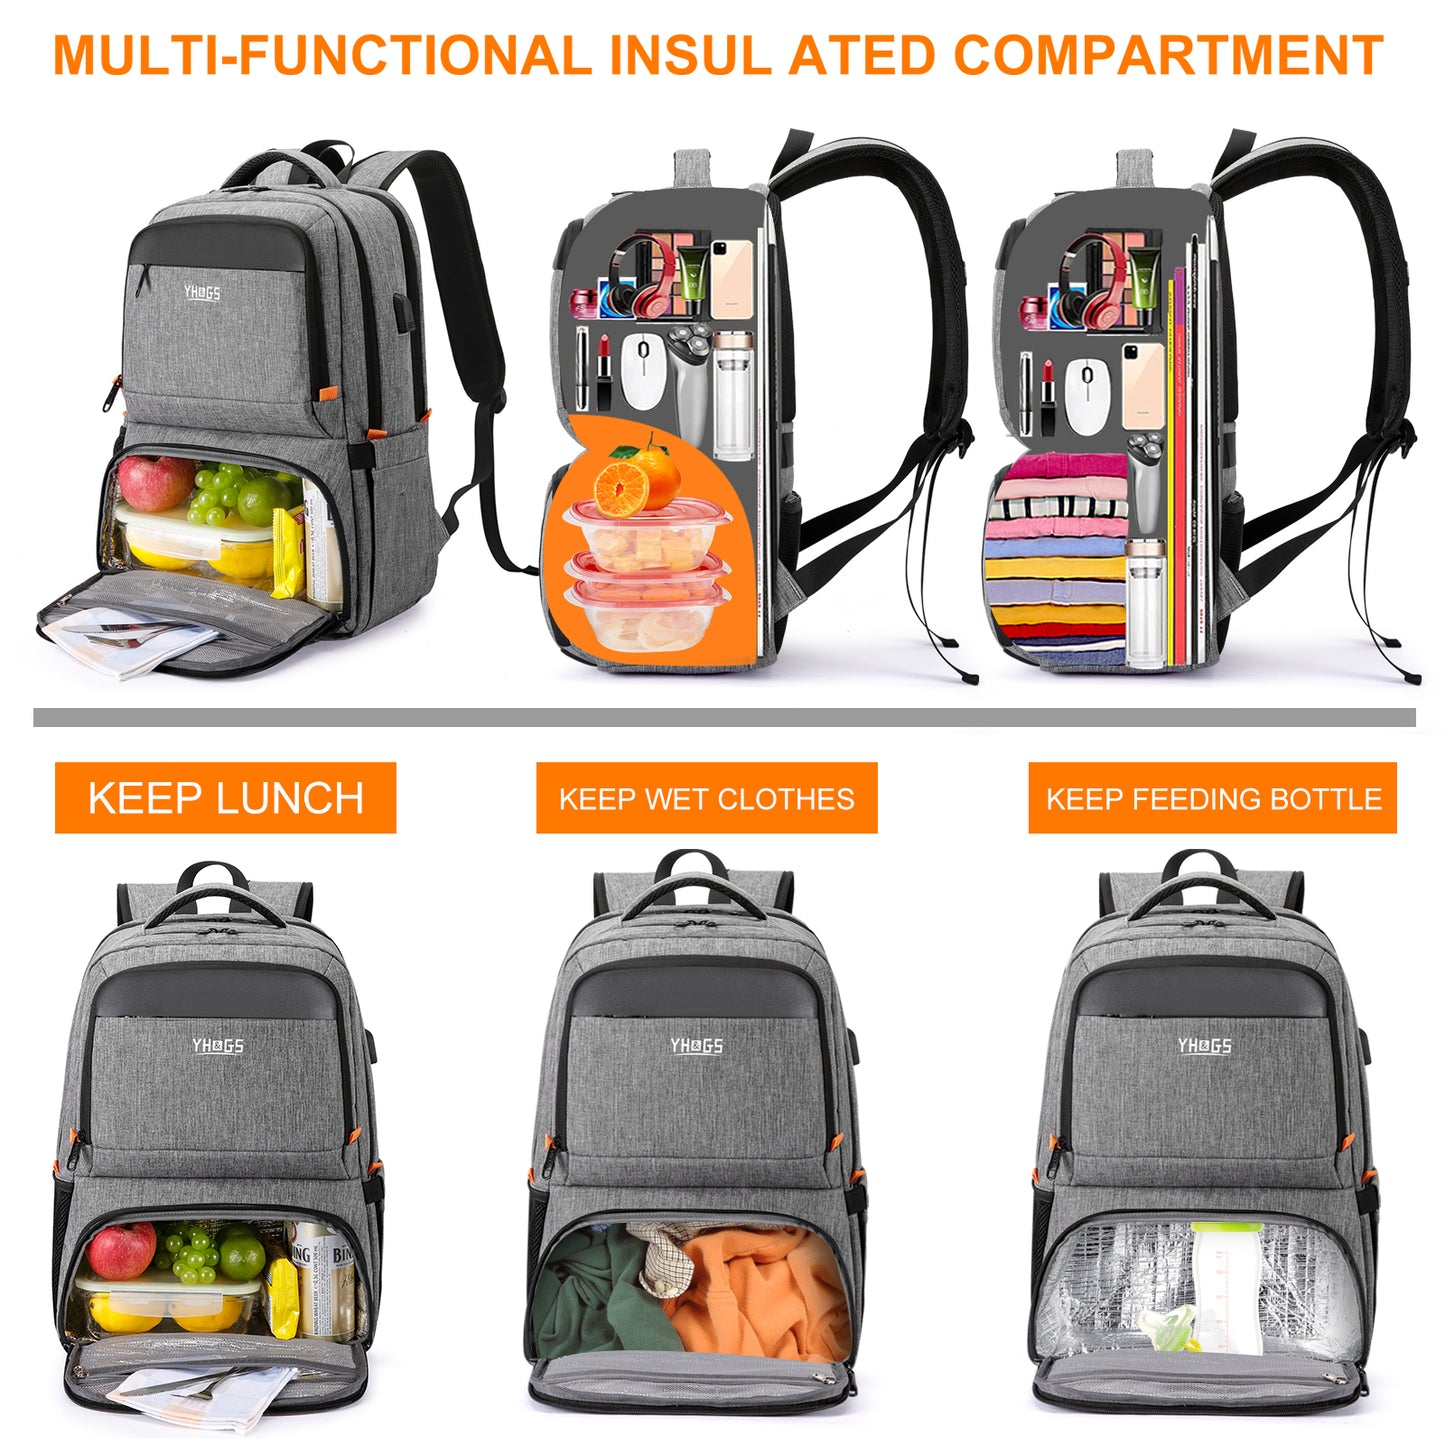 Lunch Backpack, Insulated Cooler Backpack Lunch Box for Men Women, 15.6 Inches RFID Blocking Laptop Backpack with USB Port, Water Resistant Leak-proof Lunch Bag for Work School Picnics Hiking Grey